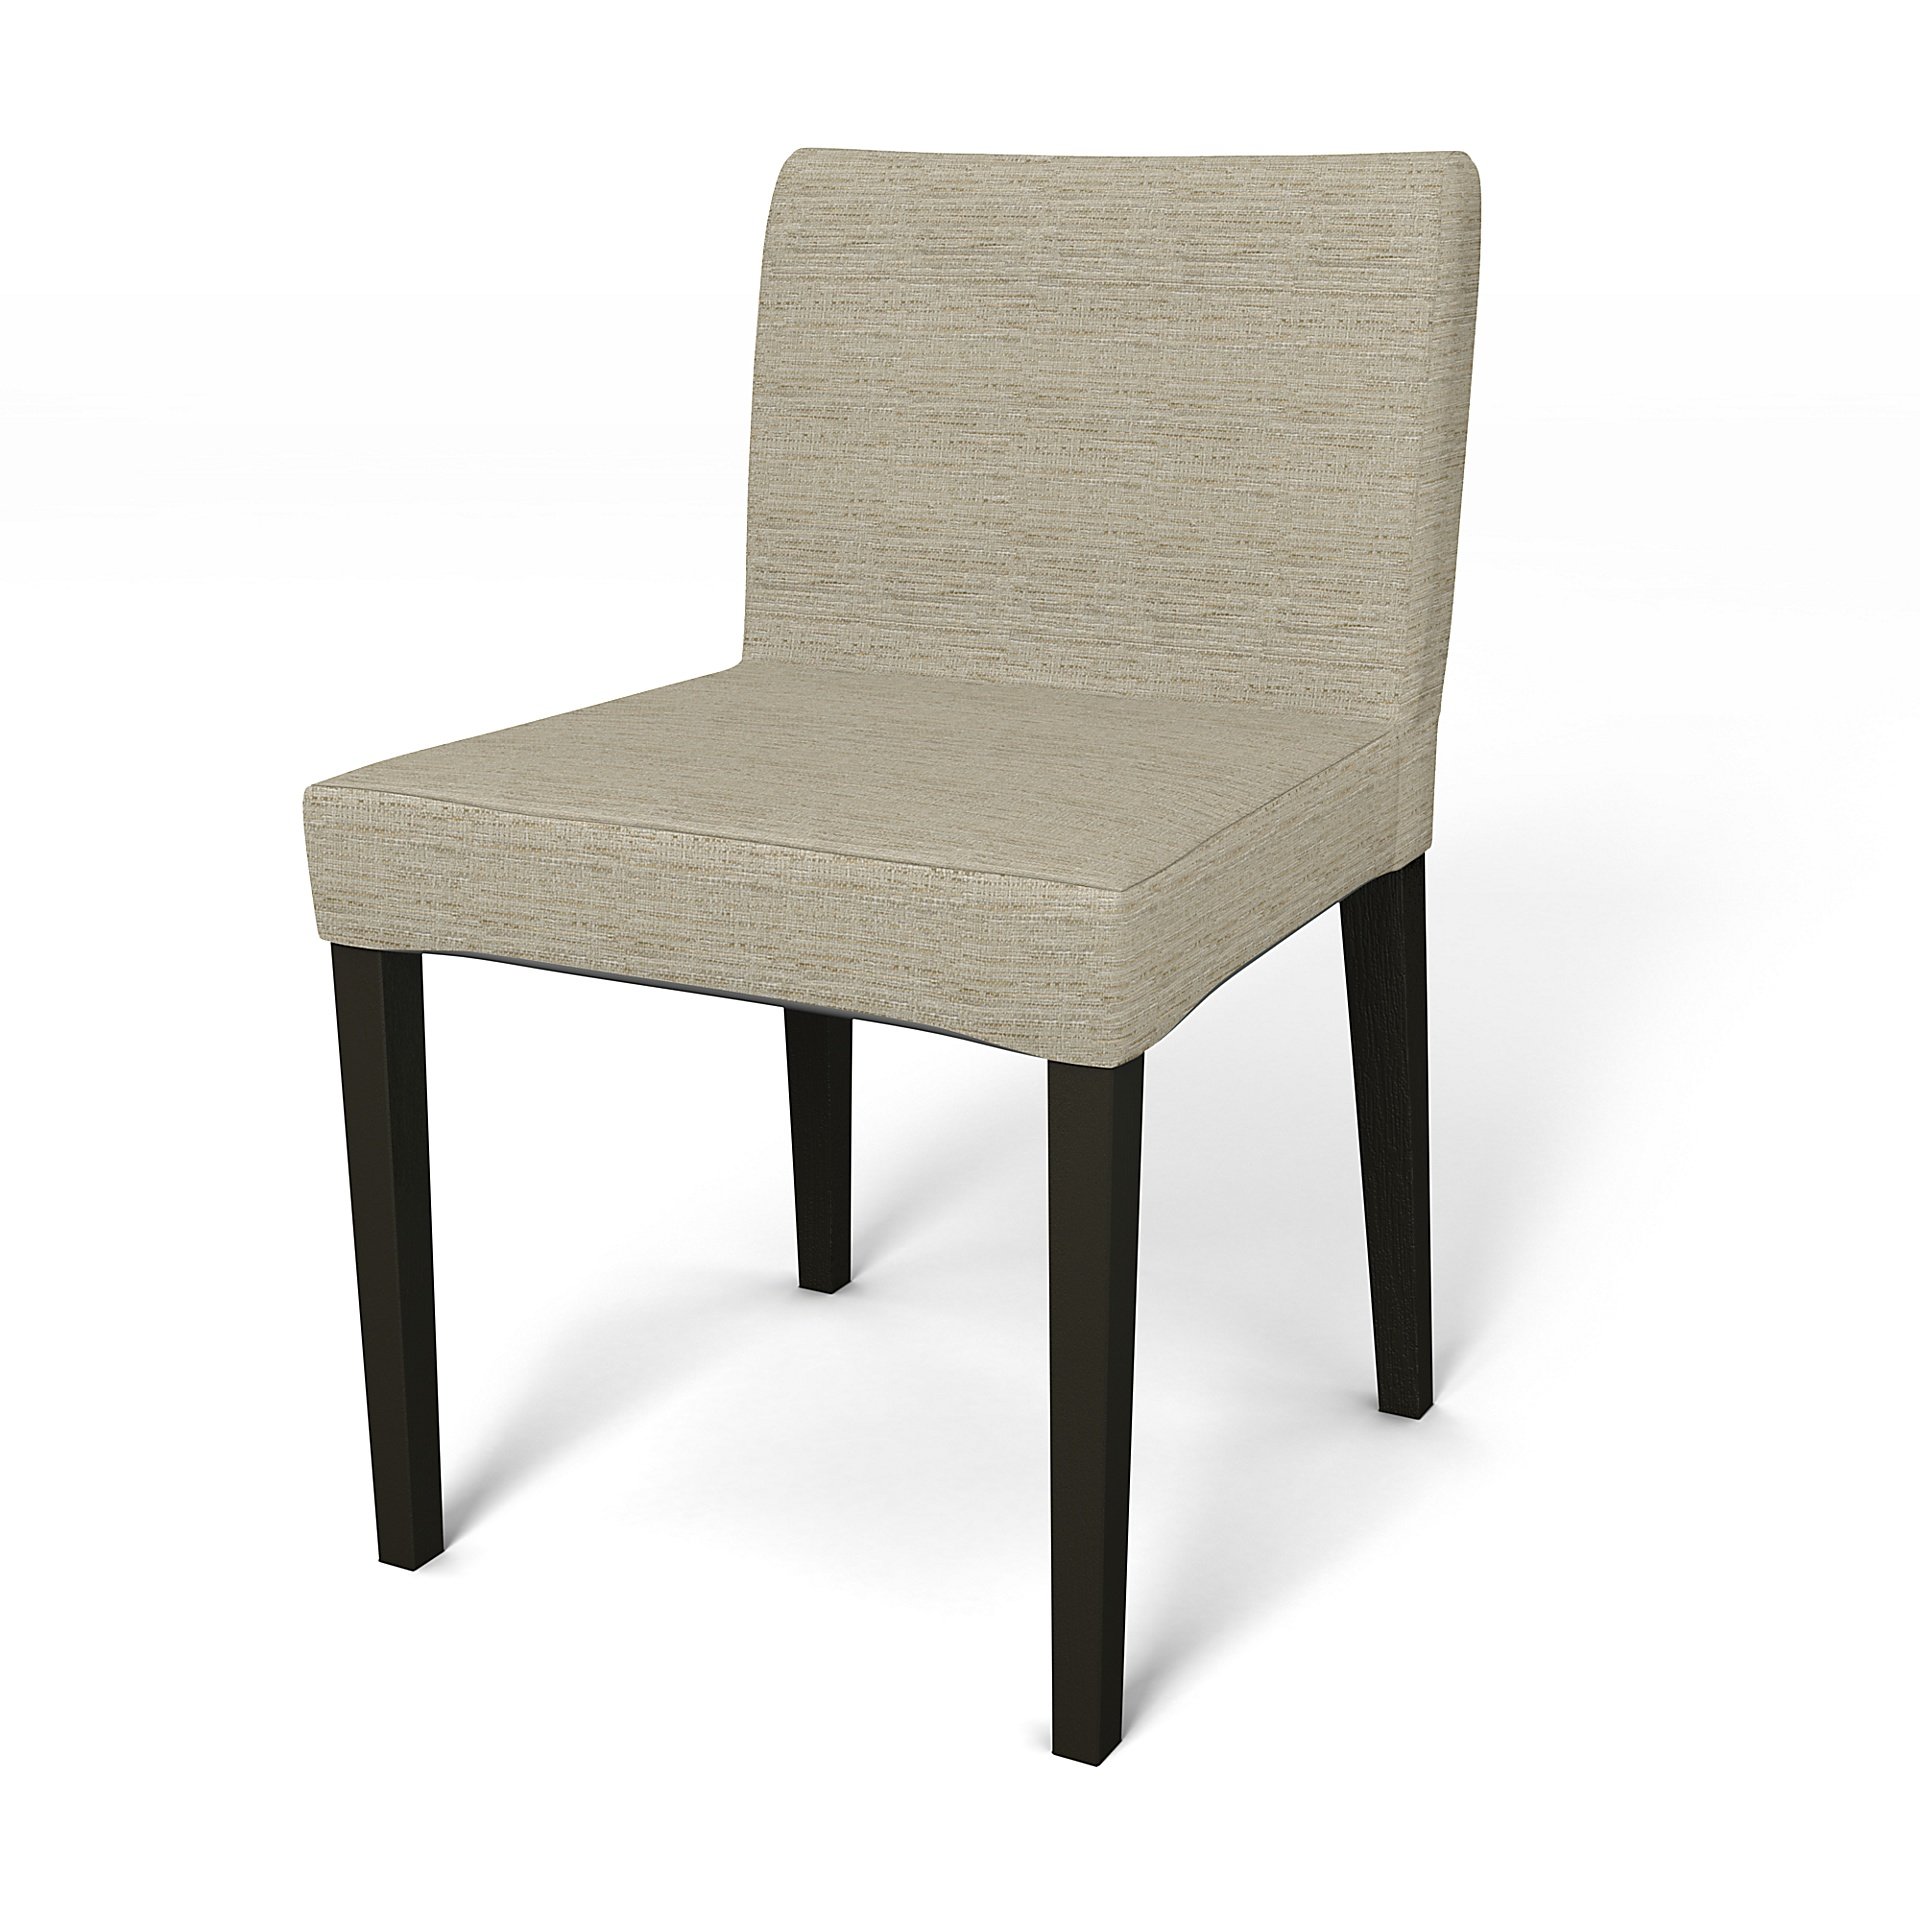 IKEA - Nils Dining Chair Cover, Light Sand, Boucle & Texture - Bemz